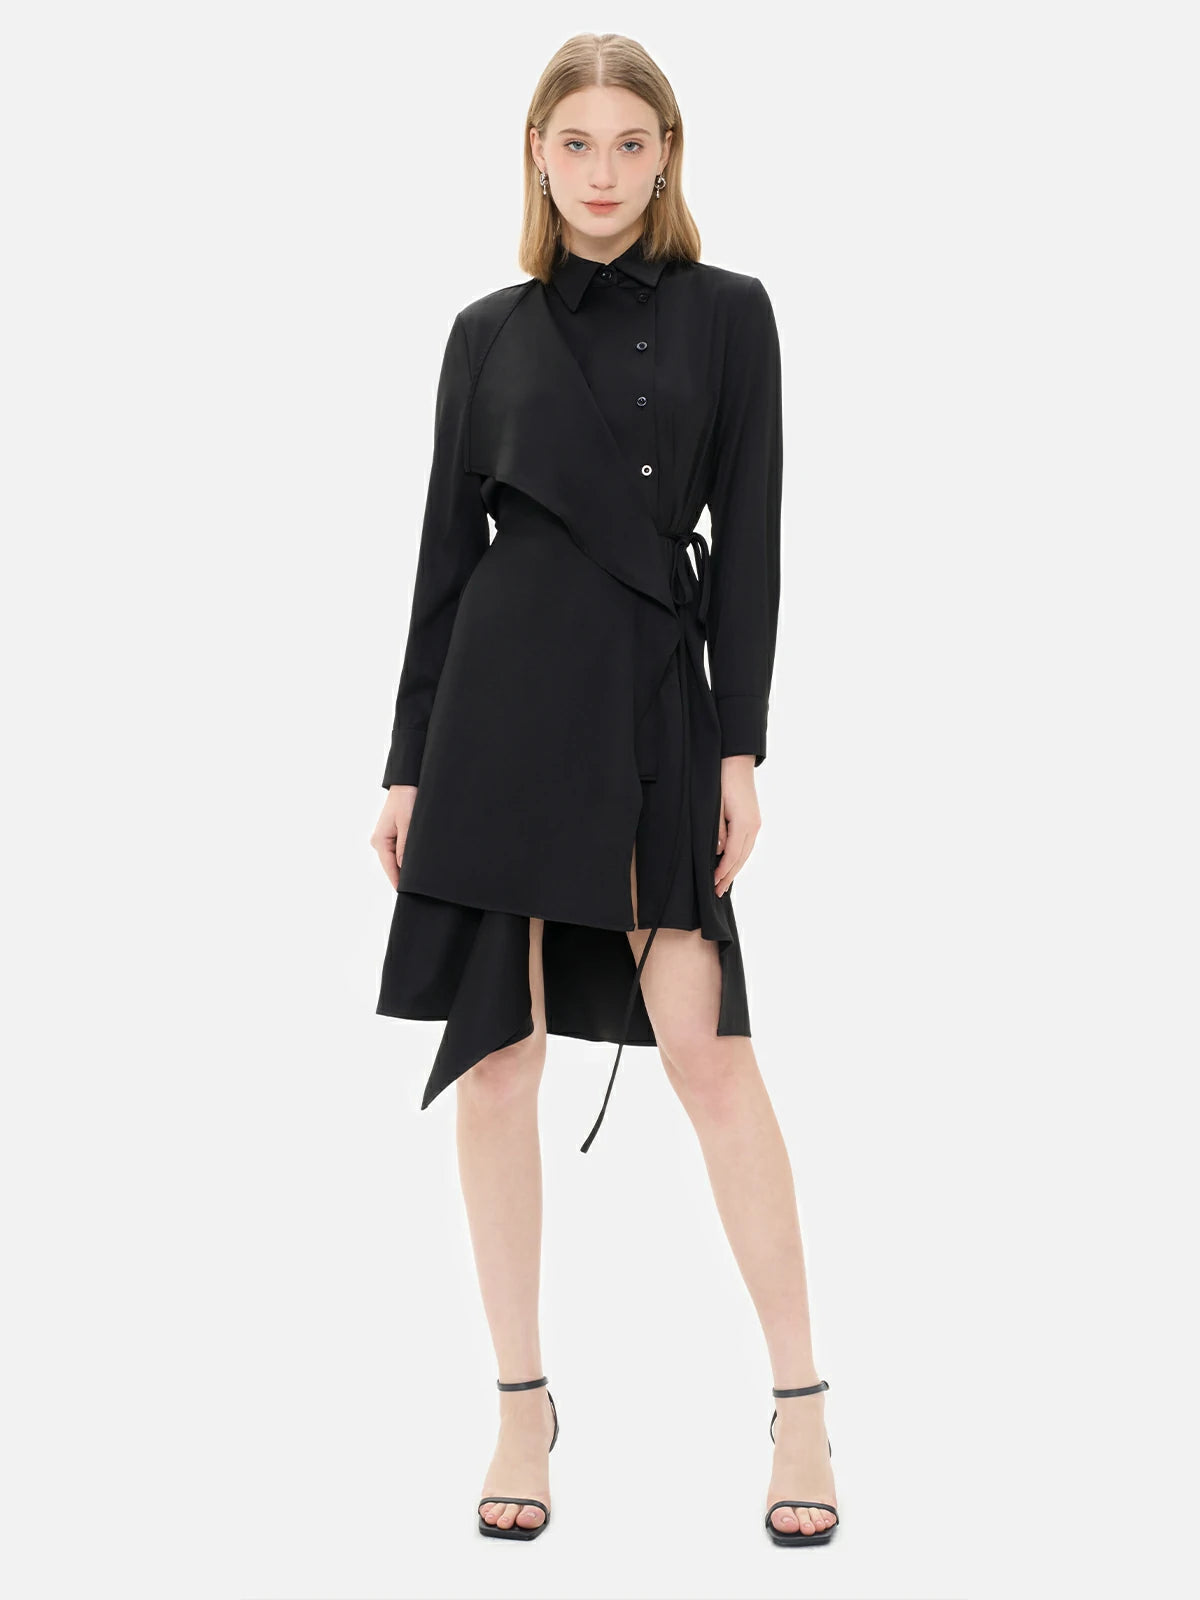 Elevate your style with this black shirt dress featuring a waist-tie accent, irregular hem, and front paneling.